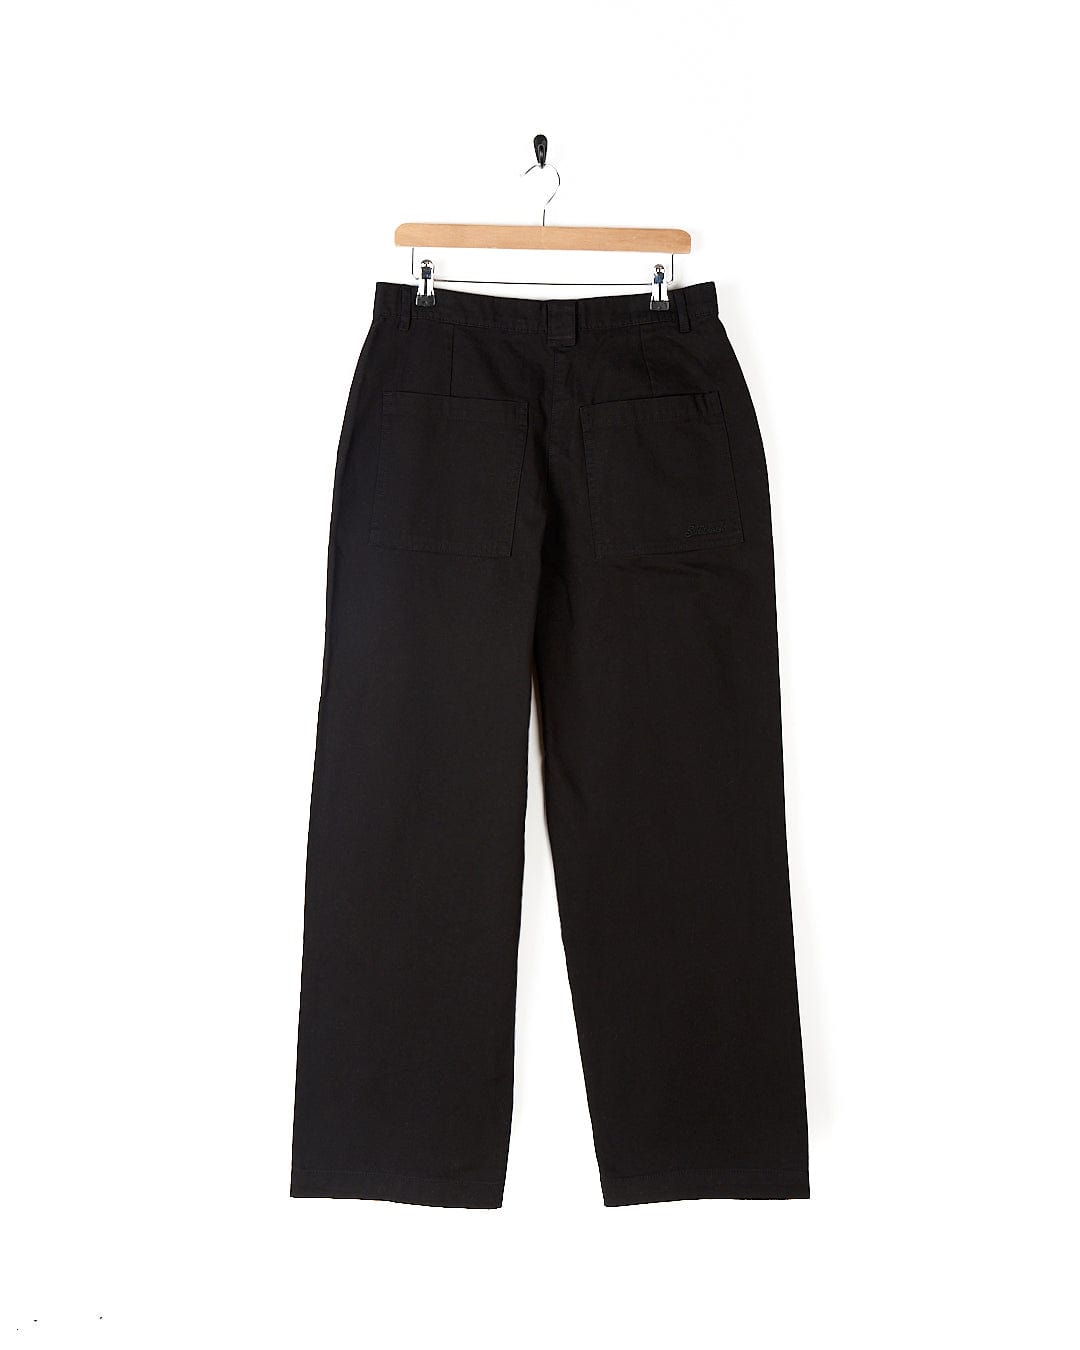 A pair of Saltrock Hilda Twill - Womens Trouser - Black hanging on a hanger.